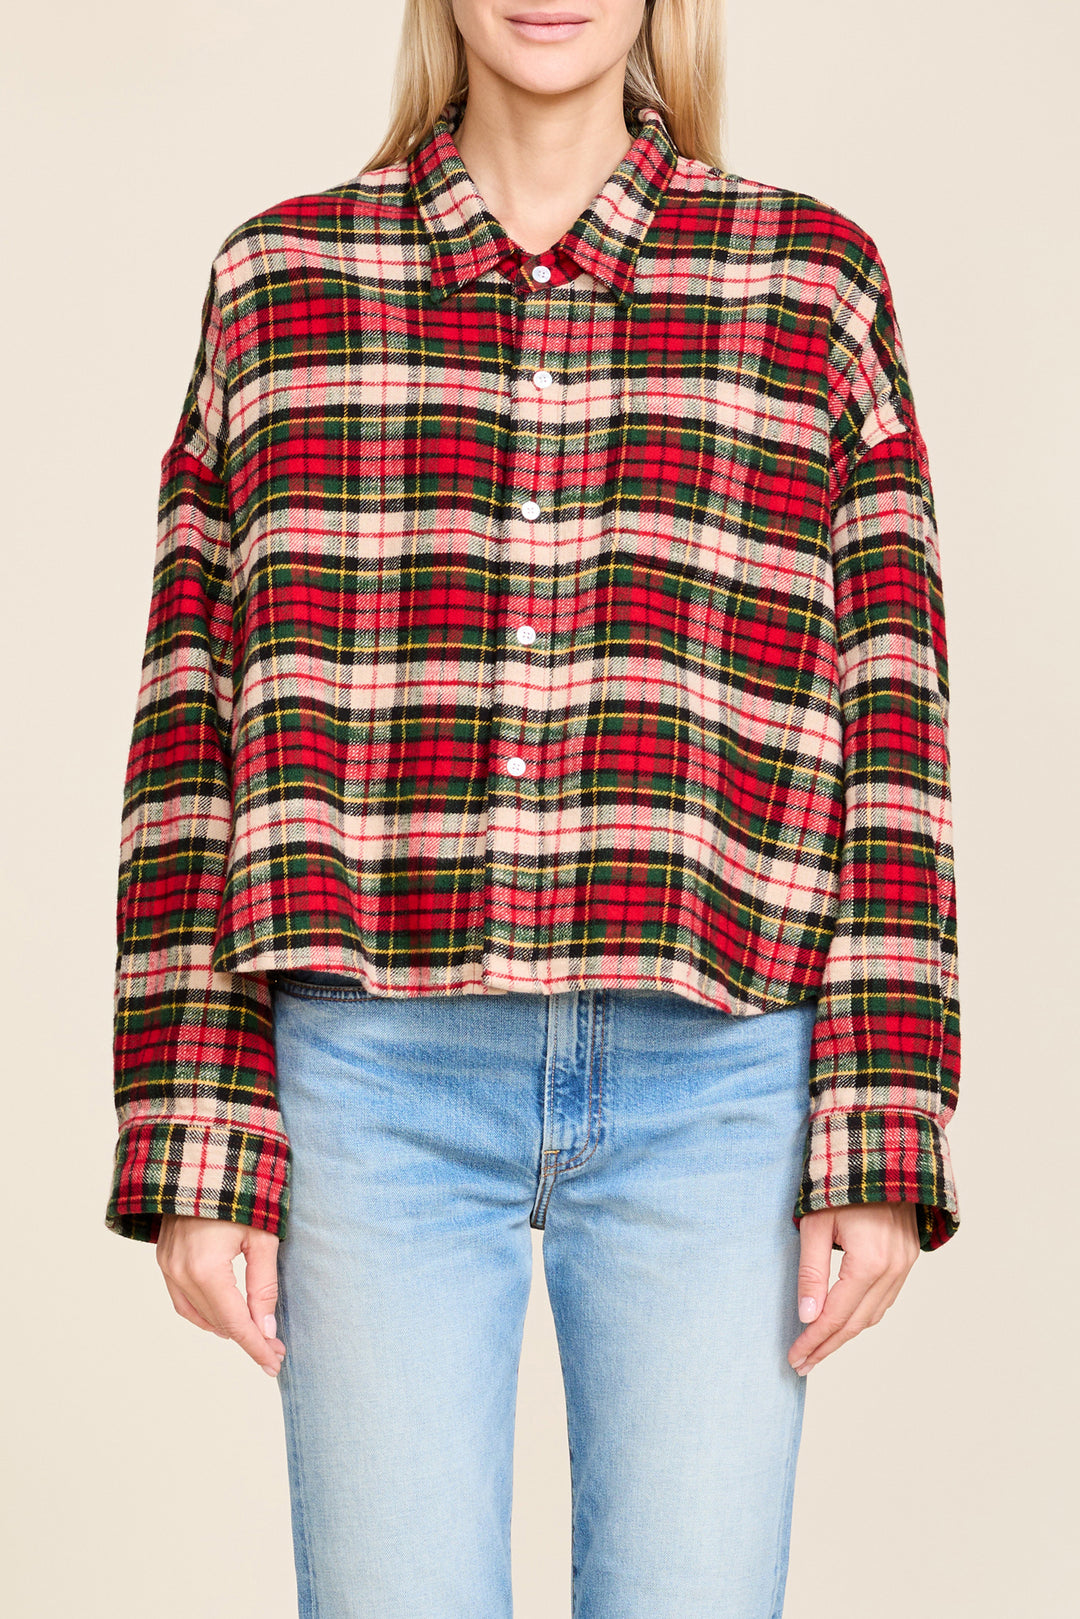 Cropped Shirt - Red/ Green Plaid